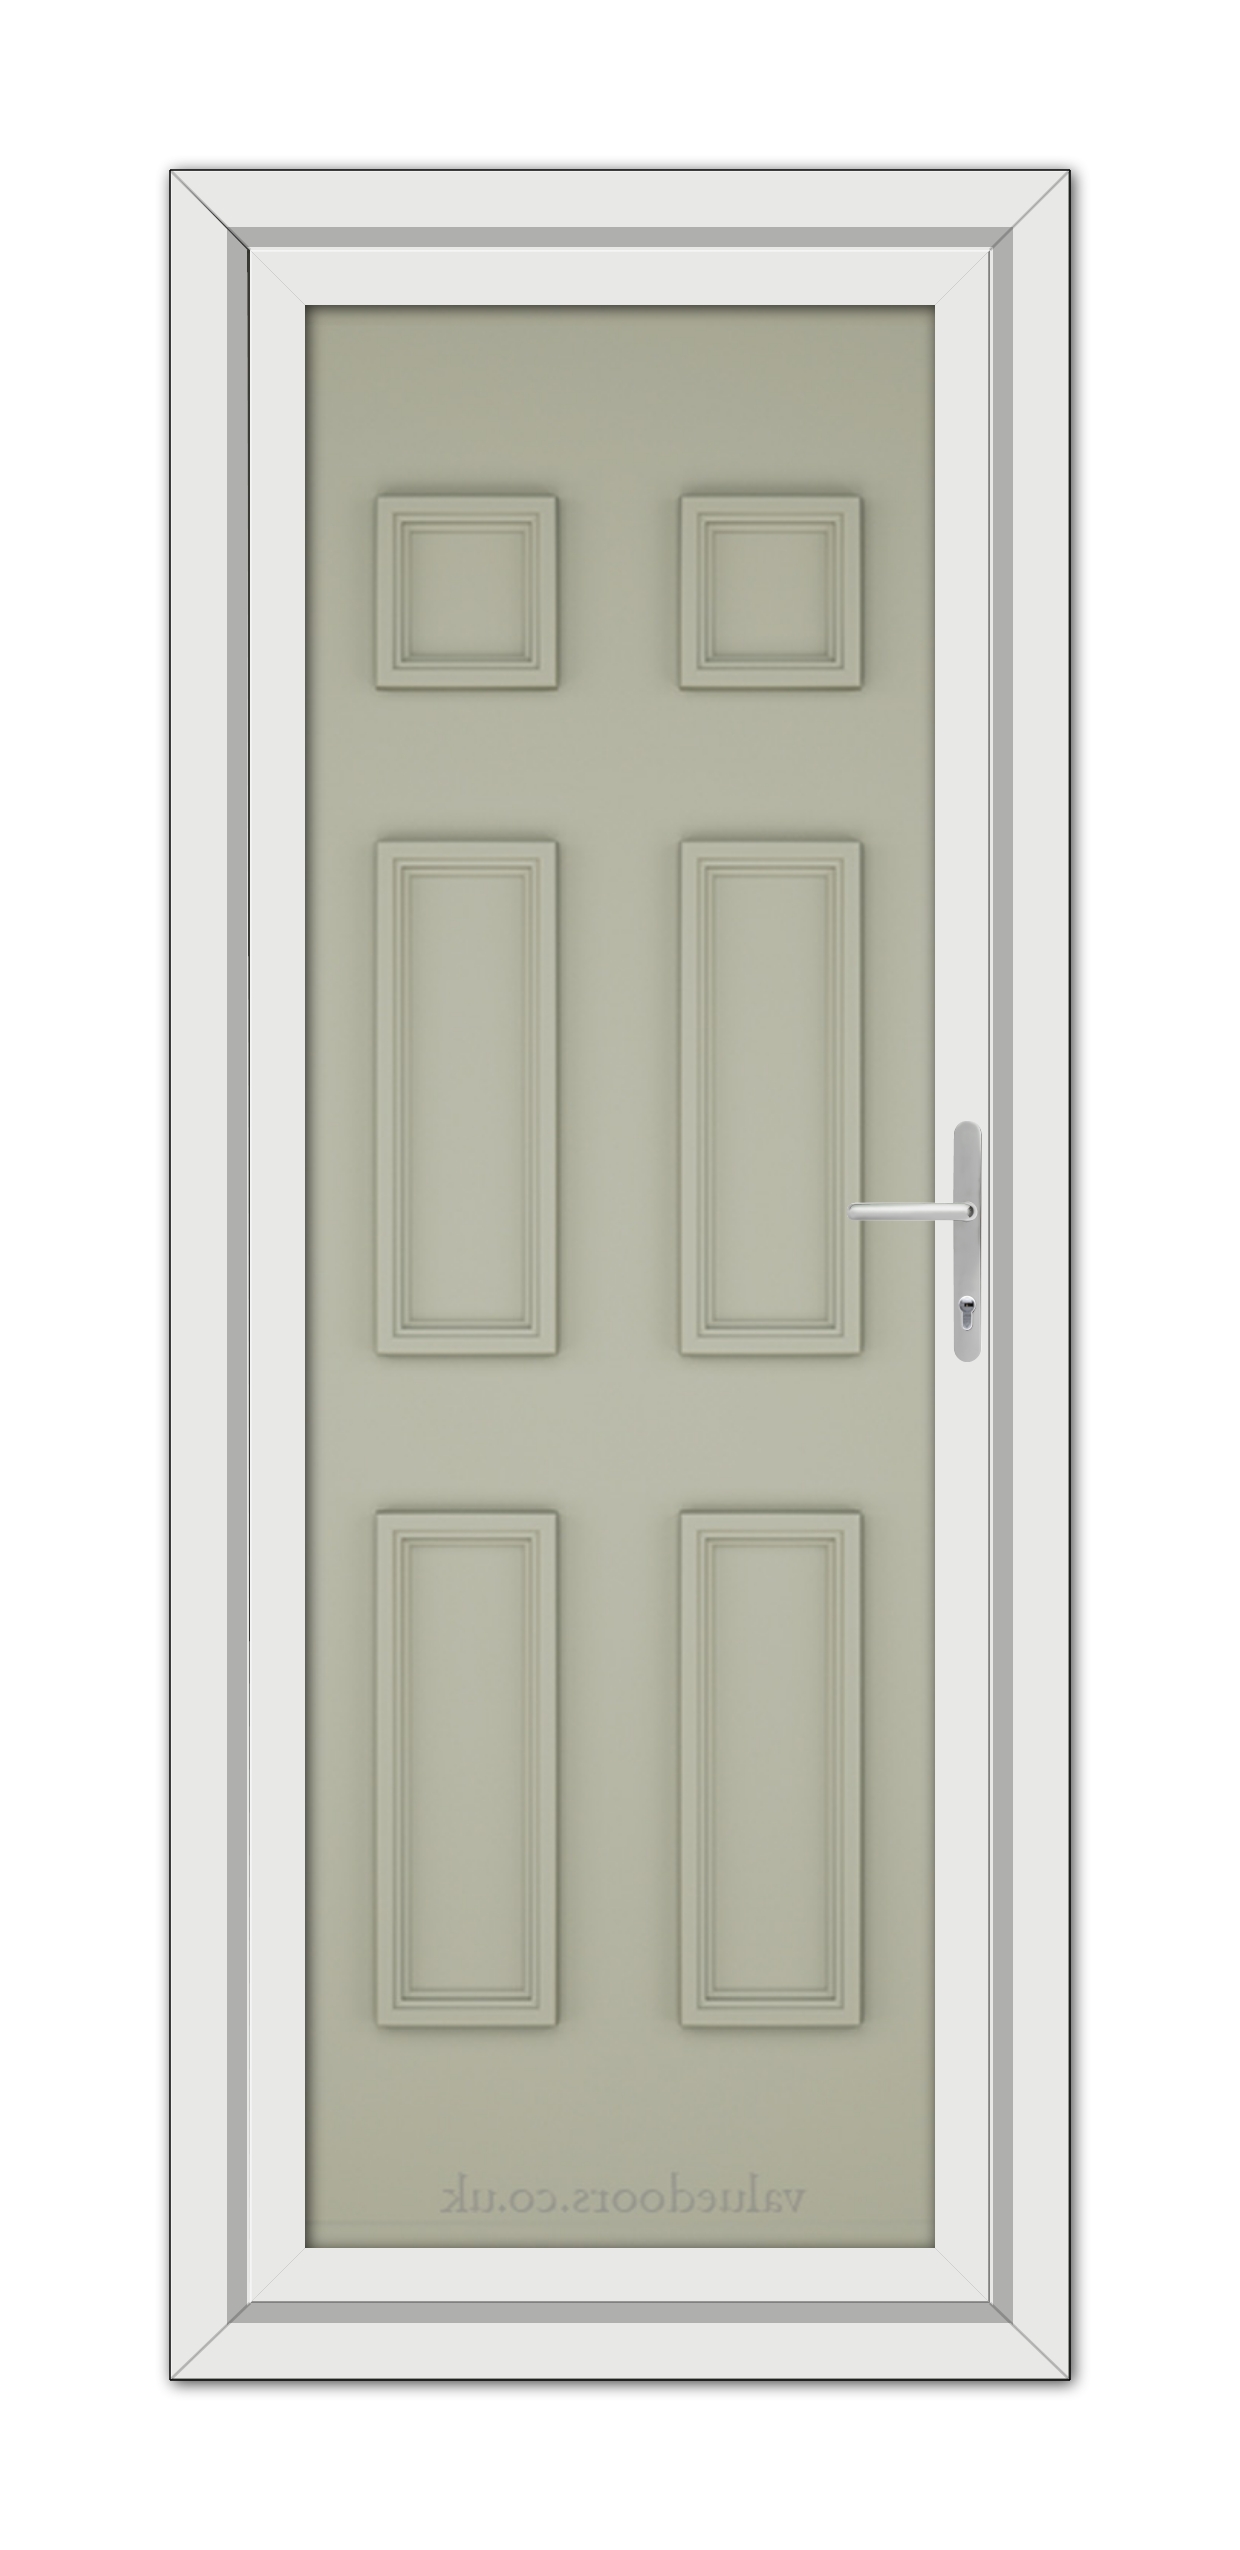 A modern pale Agate Grey Windsor Solid uPVC Door featuring six raised panels and a sleek silver handle, set within a white door frame.